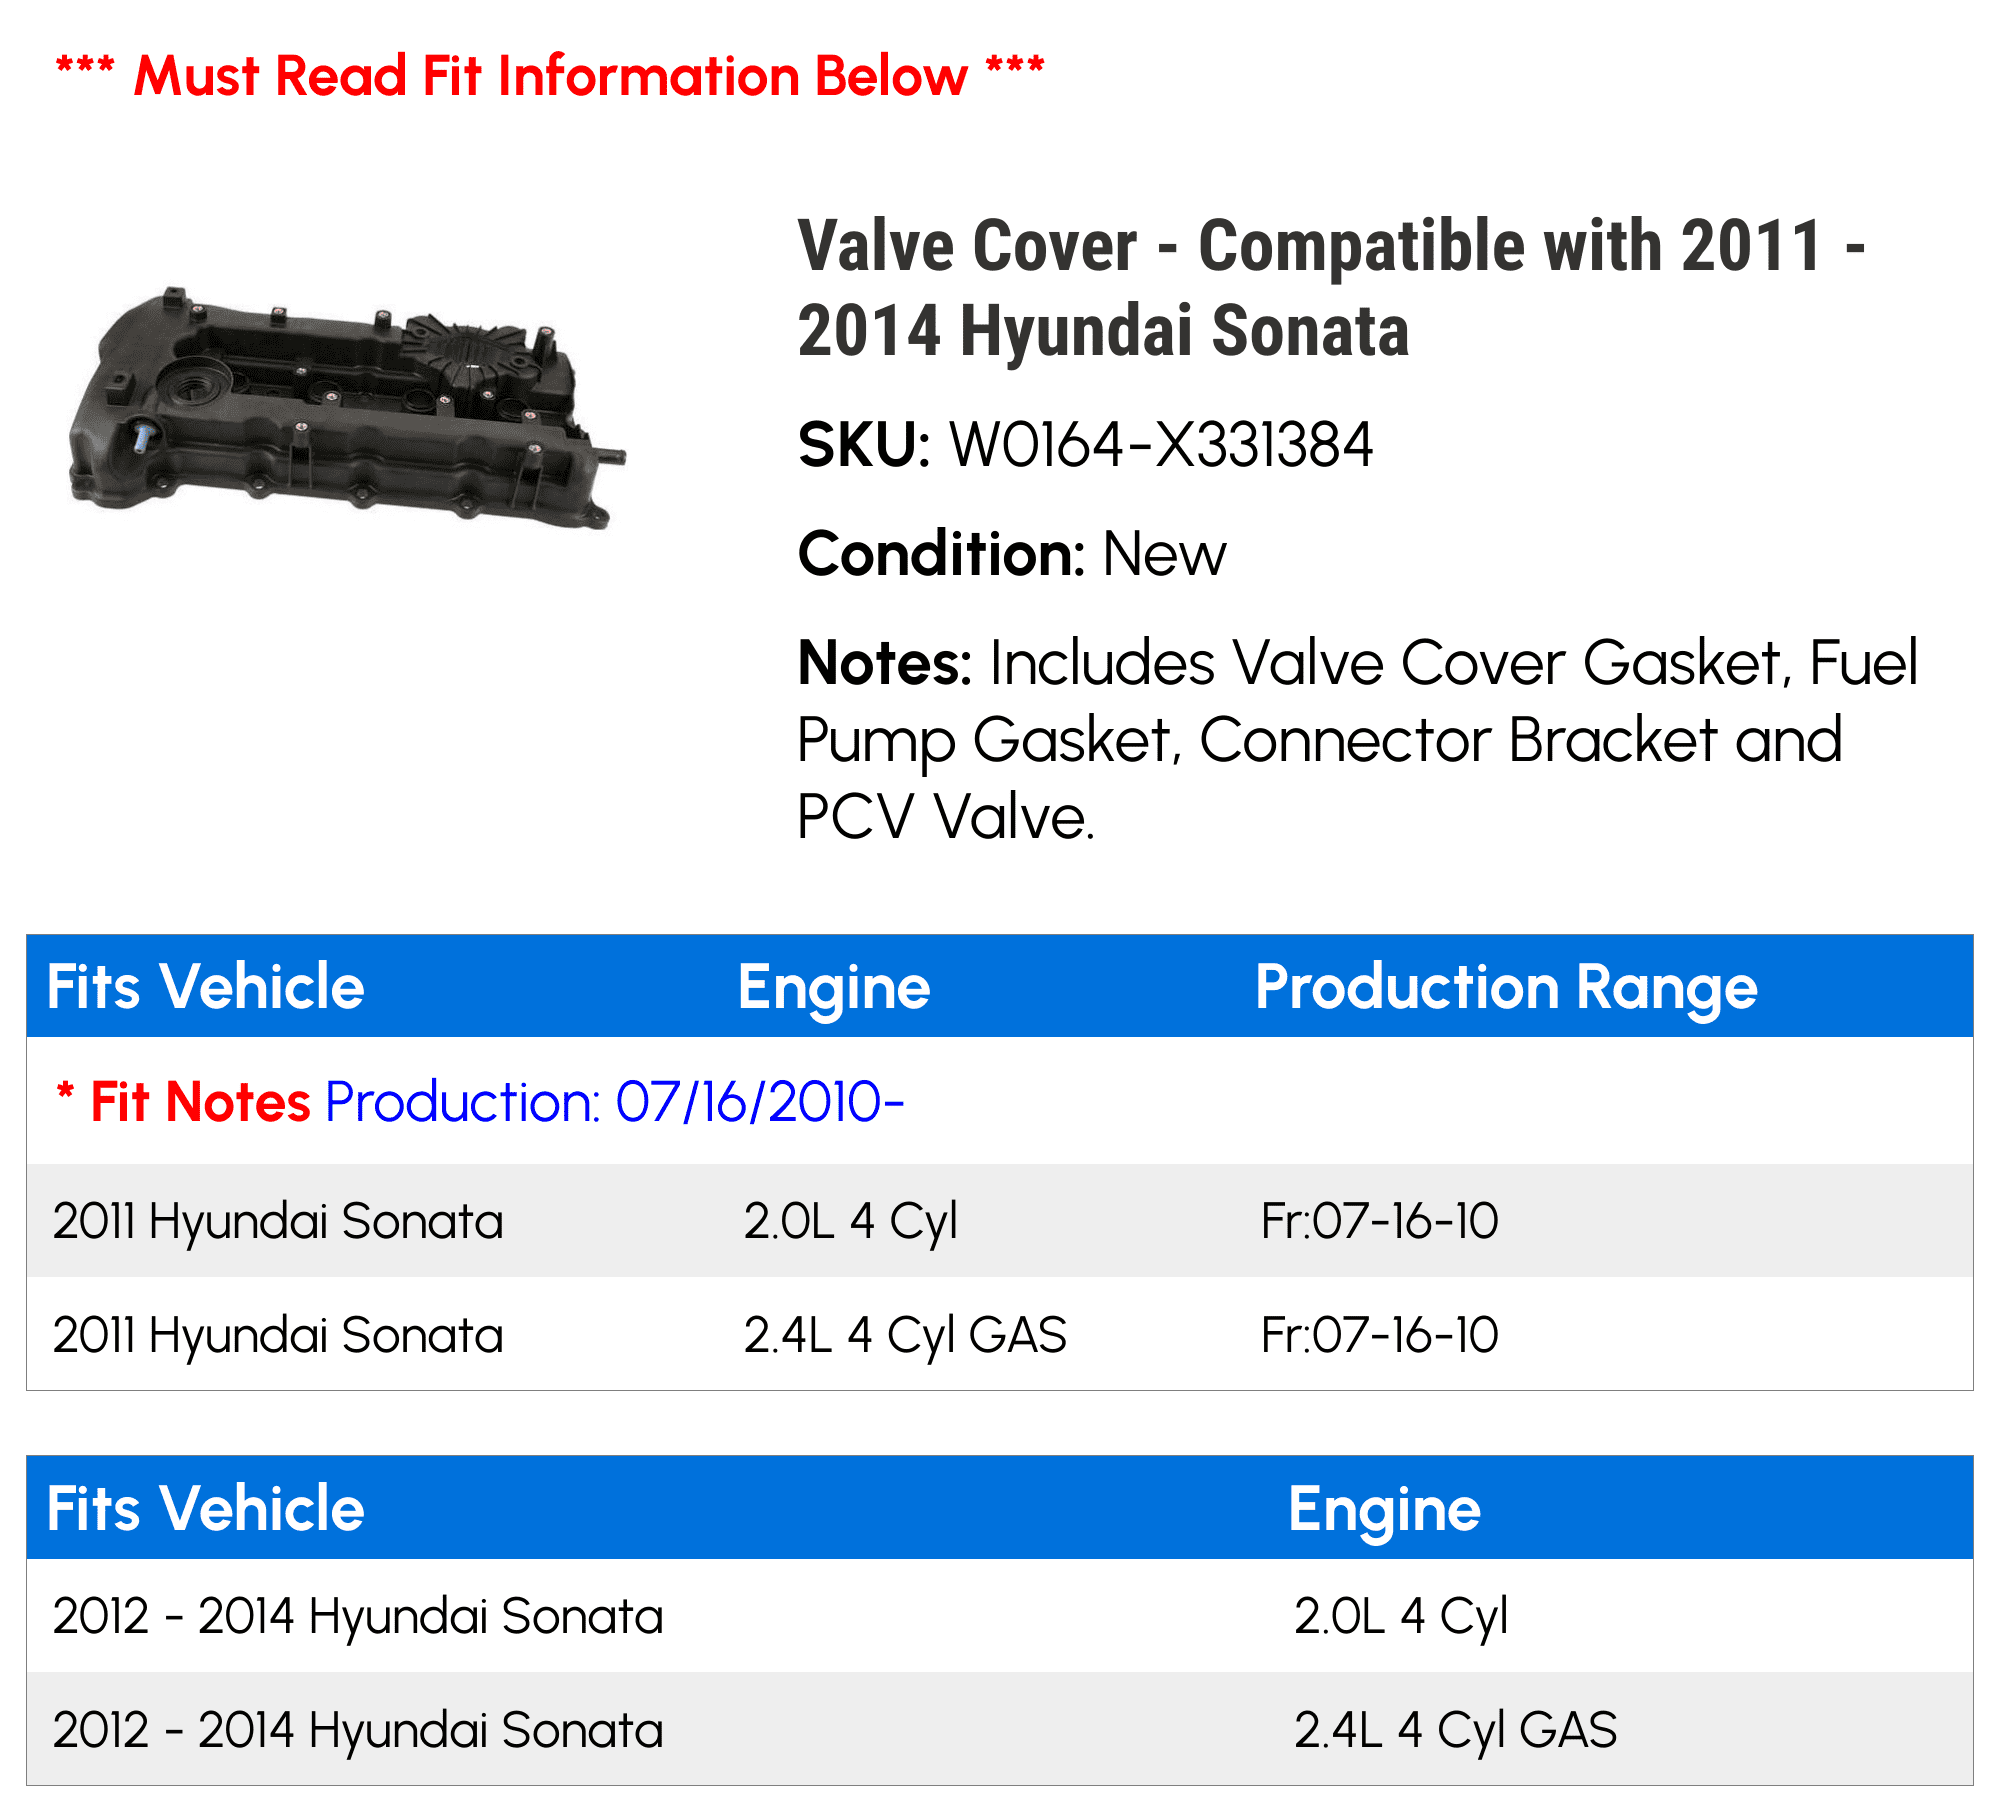 Engine Valve Cover with Gaskets Compatible with 2011 2014 Hyundai Sonata  (From 07/16/2010 Vehicle Production) 2012 2013